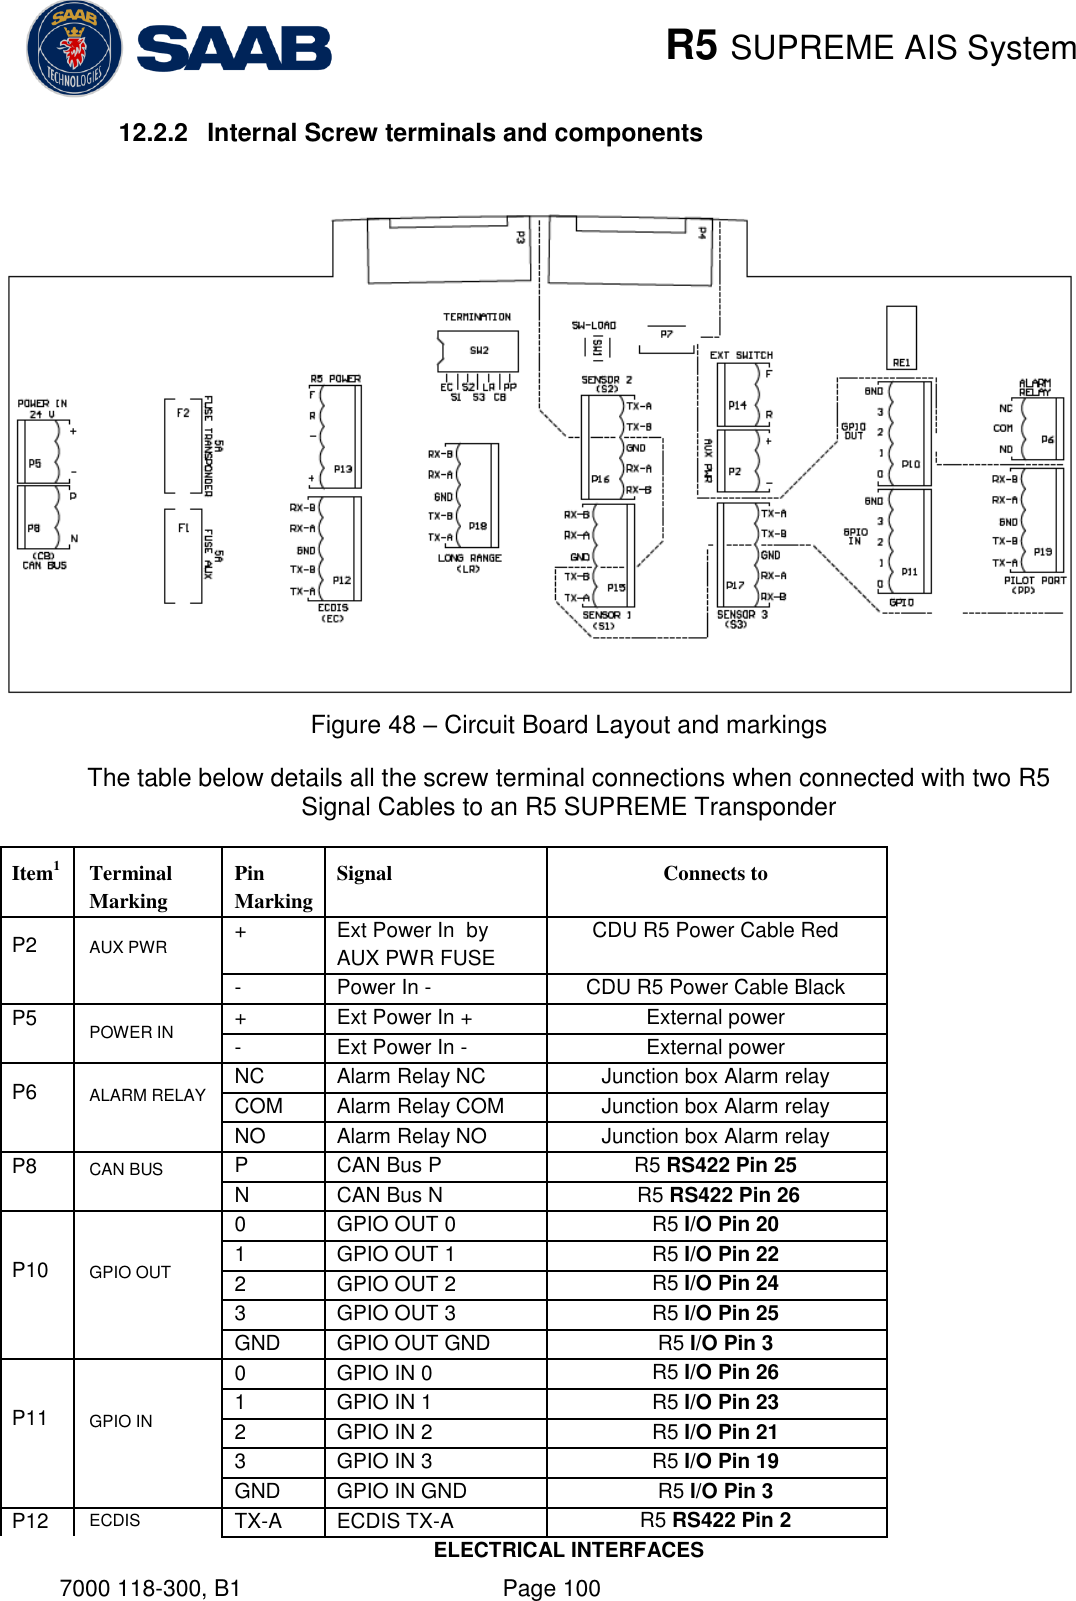    R5 SUPREME AIS System ELECTRICAL INTERFACES 7000 118-300, B1    Page 100 12.2.2  Internal Screw terminals and components   Figure 48 – Circuit Board Layout and markings The table below details all the screw terminal connections when connected with two R5 Signal Cables to an R5 SUPREME Transponder Item1 Terminal Marking Pin Marking Signal Connects to P2  AUX PWR  + Ext Power In  by AUX PWR FUSE CDU R5 Power Cable Red - Power In - CDU R5 Power Cable Black P5  POWER IN + Ext Power In + External power - Ext Power In - External power P6  ALARM RELAY  NC Alarm Relay NC Junction box Alarm relay COM Alarm Relay COM Junction box Alarm relay NO Alarm Relay NO Junction box Alarm relay P8  CAN BUS  P CAN Bus P R5 RS422 Pin 25 N CAN Bus N  R5 RS422 Pin 26 P10  GPIO OUT  0 GPIO OUT 0 R5 I/O Pin 20 1 GPIO OUT 1 R5 I/O Pin 22 2 GPIO OUT 2 R5 I/O Pin 24 3 GPIO OUT 3 R5 I/O Pin 25 GND GPIO OUT GND R5 I/O Pin 3 P11  GPIO IN  0 GPIO IN 0 R5 I/O Pin 26 1 GPIO IN 1 R5 I/O Pin 23 2 GPIO IN 2 R5 I/O Pin 21 3 GPIO IN 3 R5 I/O Pin 19 GND GPIO IN GND R5 I/O Pin 3 P12 ECDIS TX-A ECDIS TX-A R5 RS422 Pin 2 